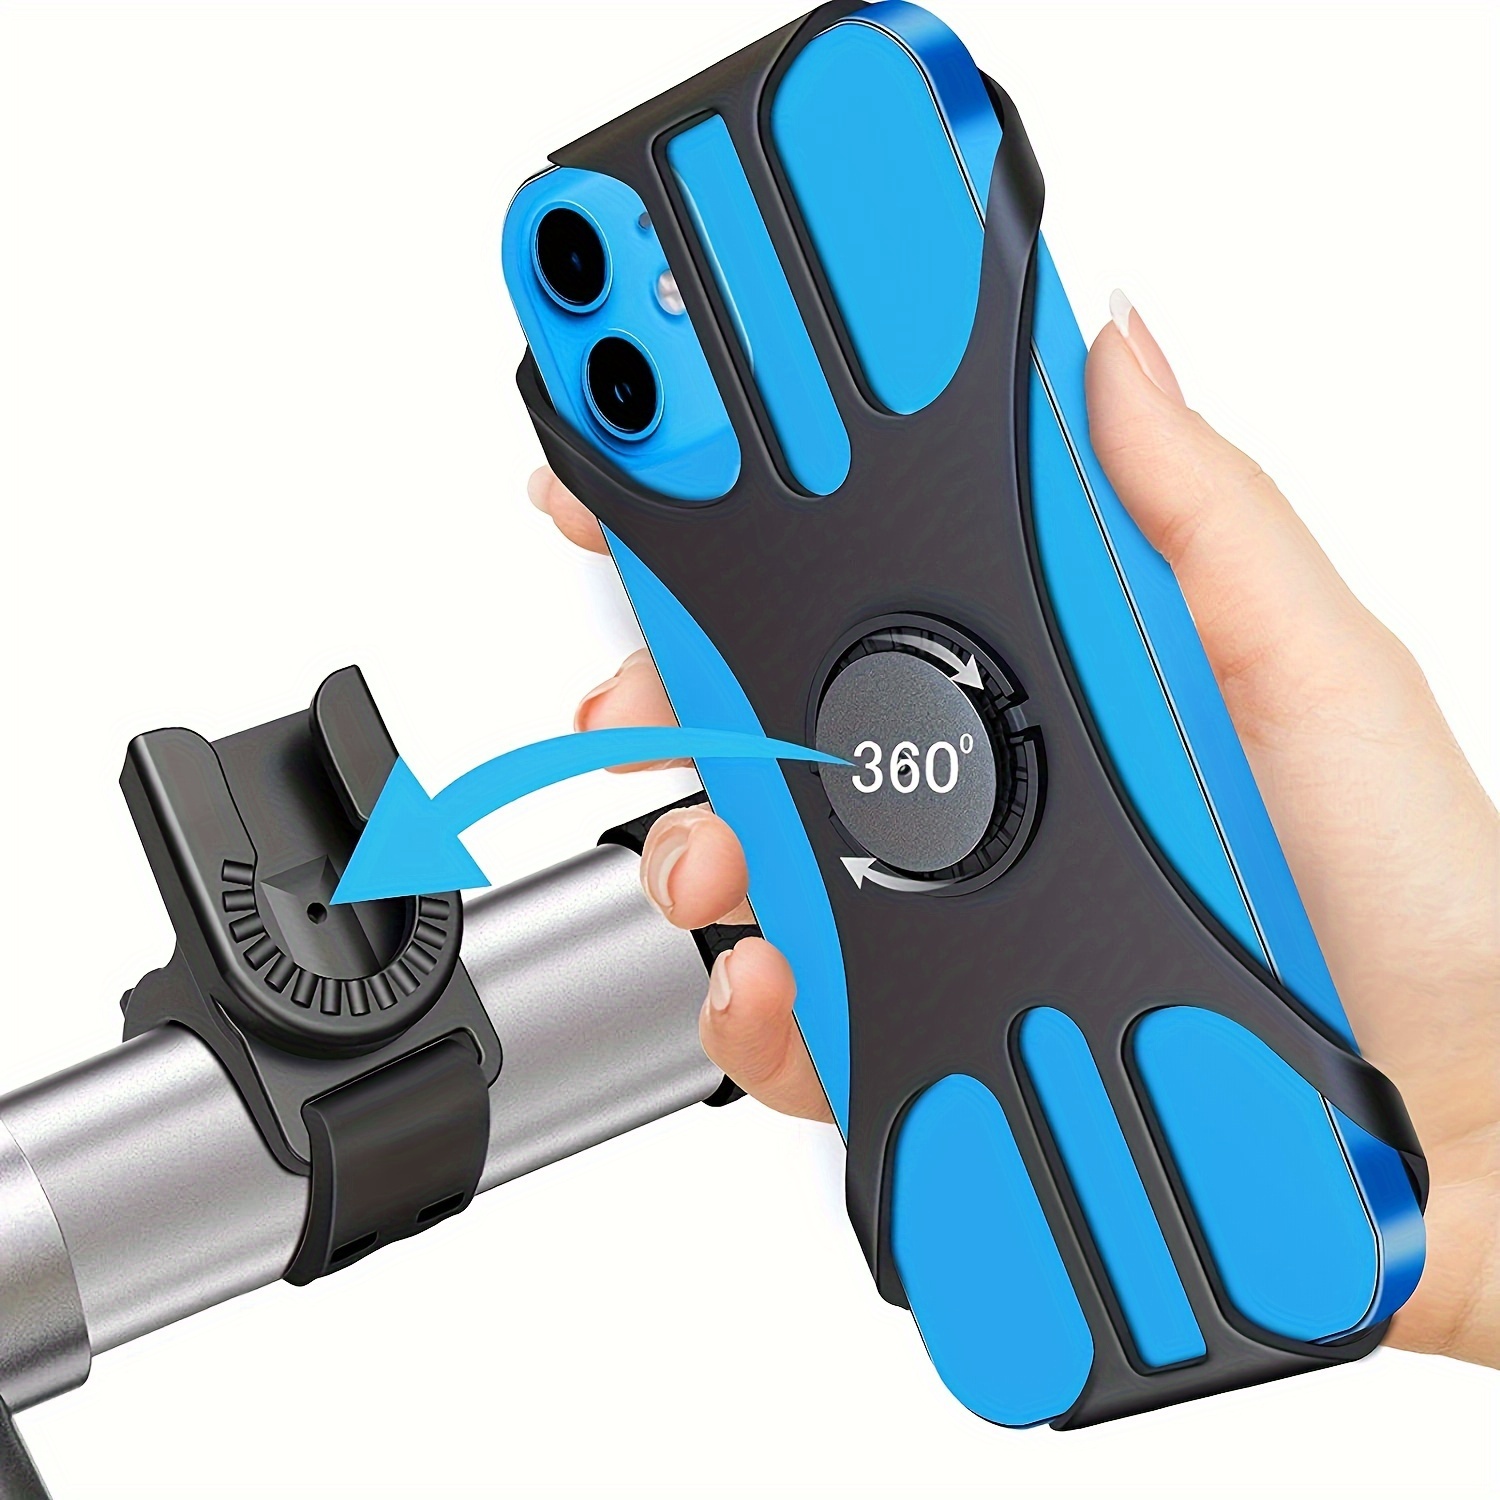 

Adjustable Silicone Bike Phone Mount - 360° Rotatable, Detachable Holder For Smartphones 4-6.7 Inch, Perfect For Motorcycles & Bicycles